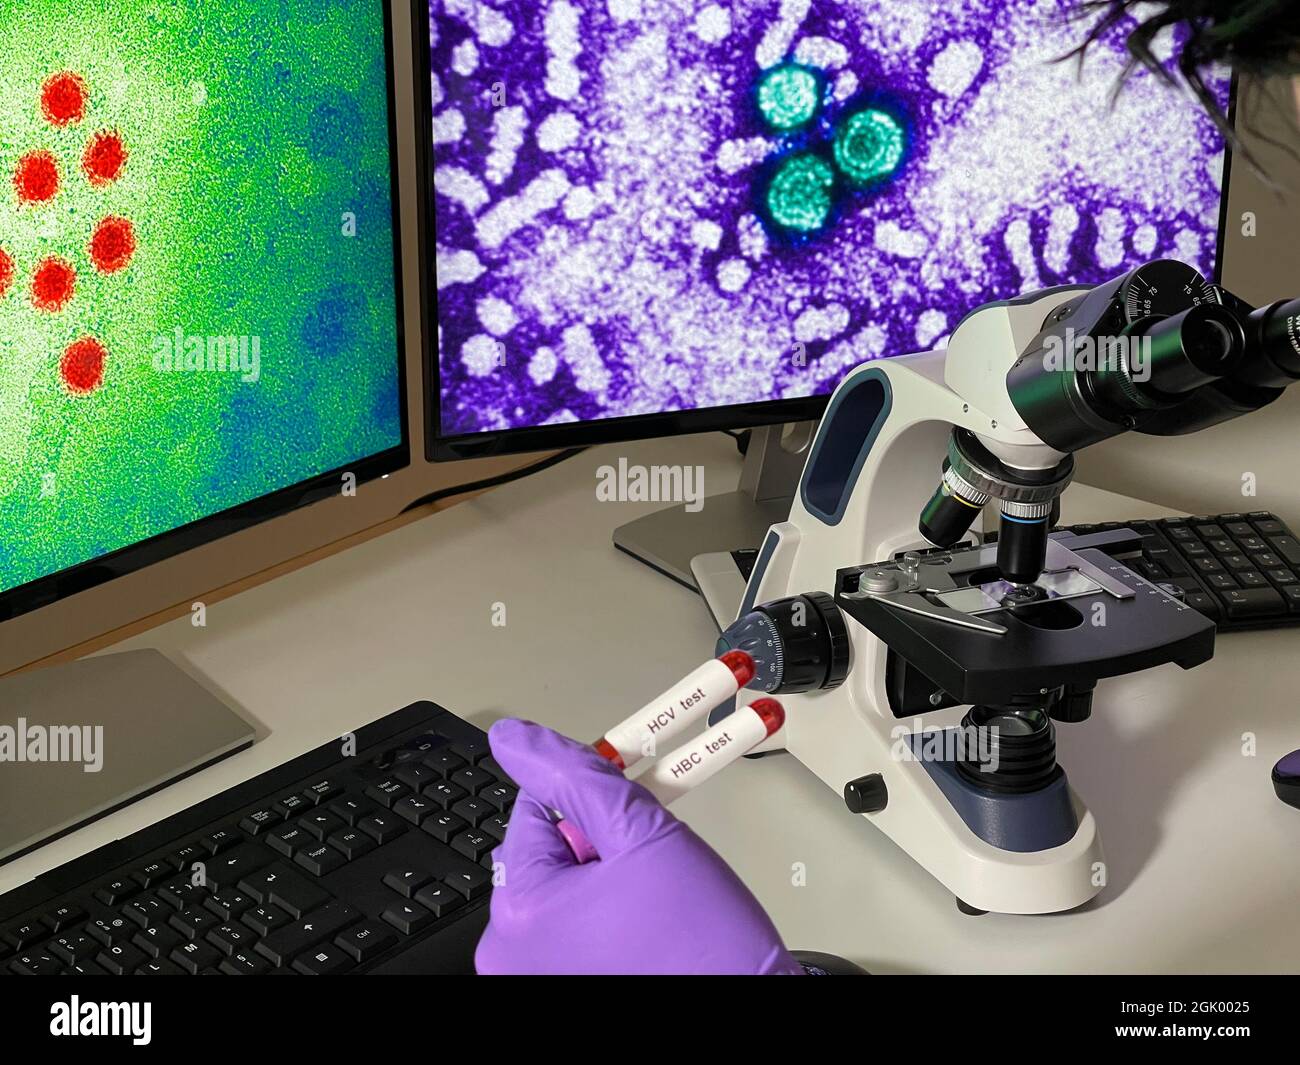 Laboratory assistant doing research with images of hepatitis A and B virus on computer. Stock Photo